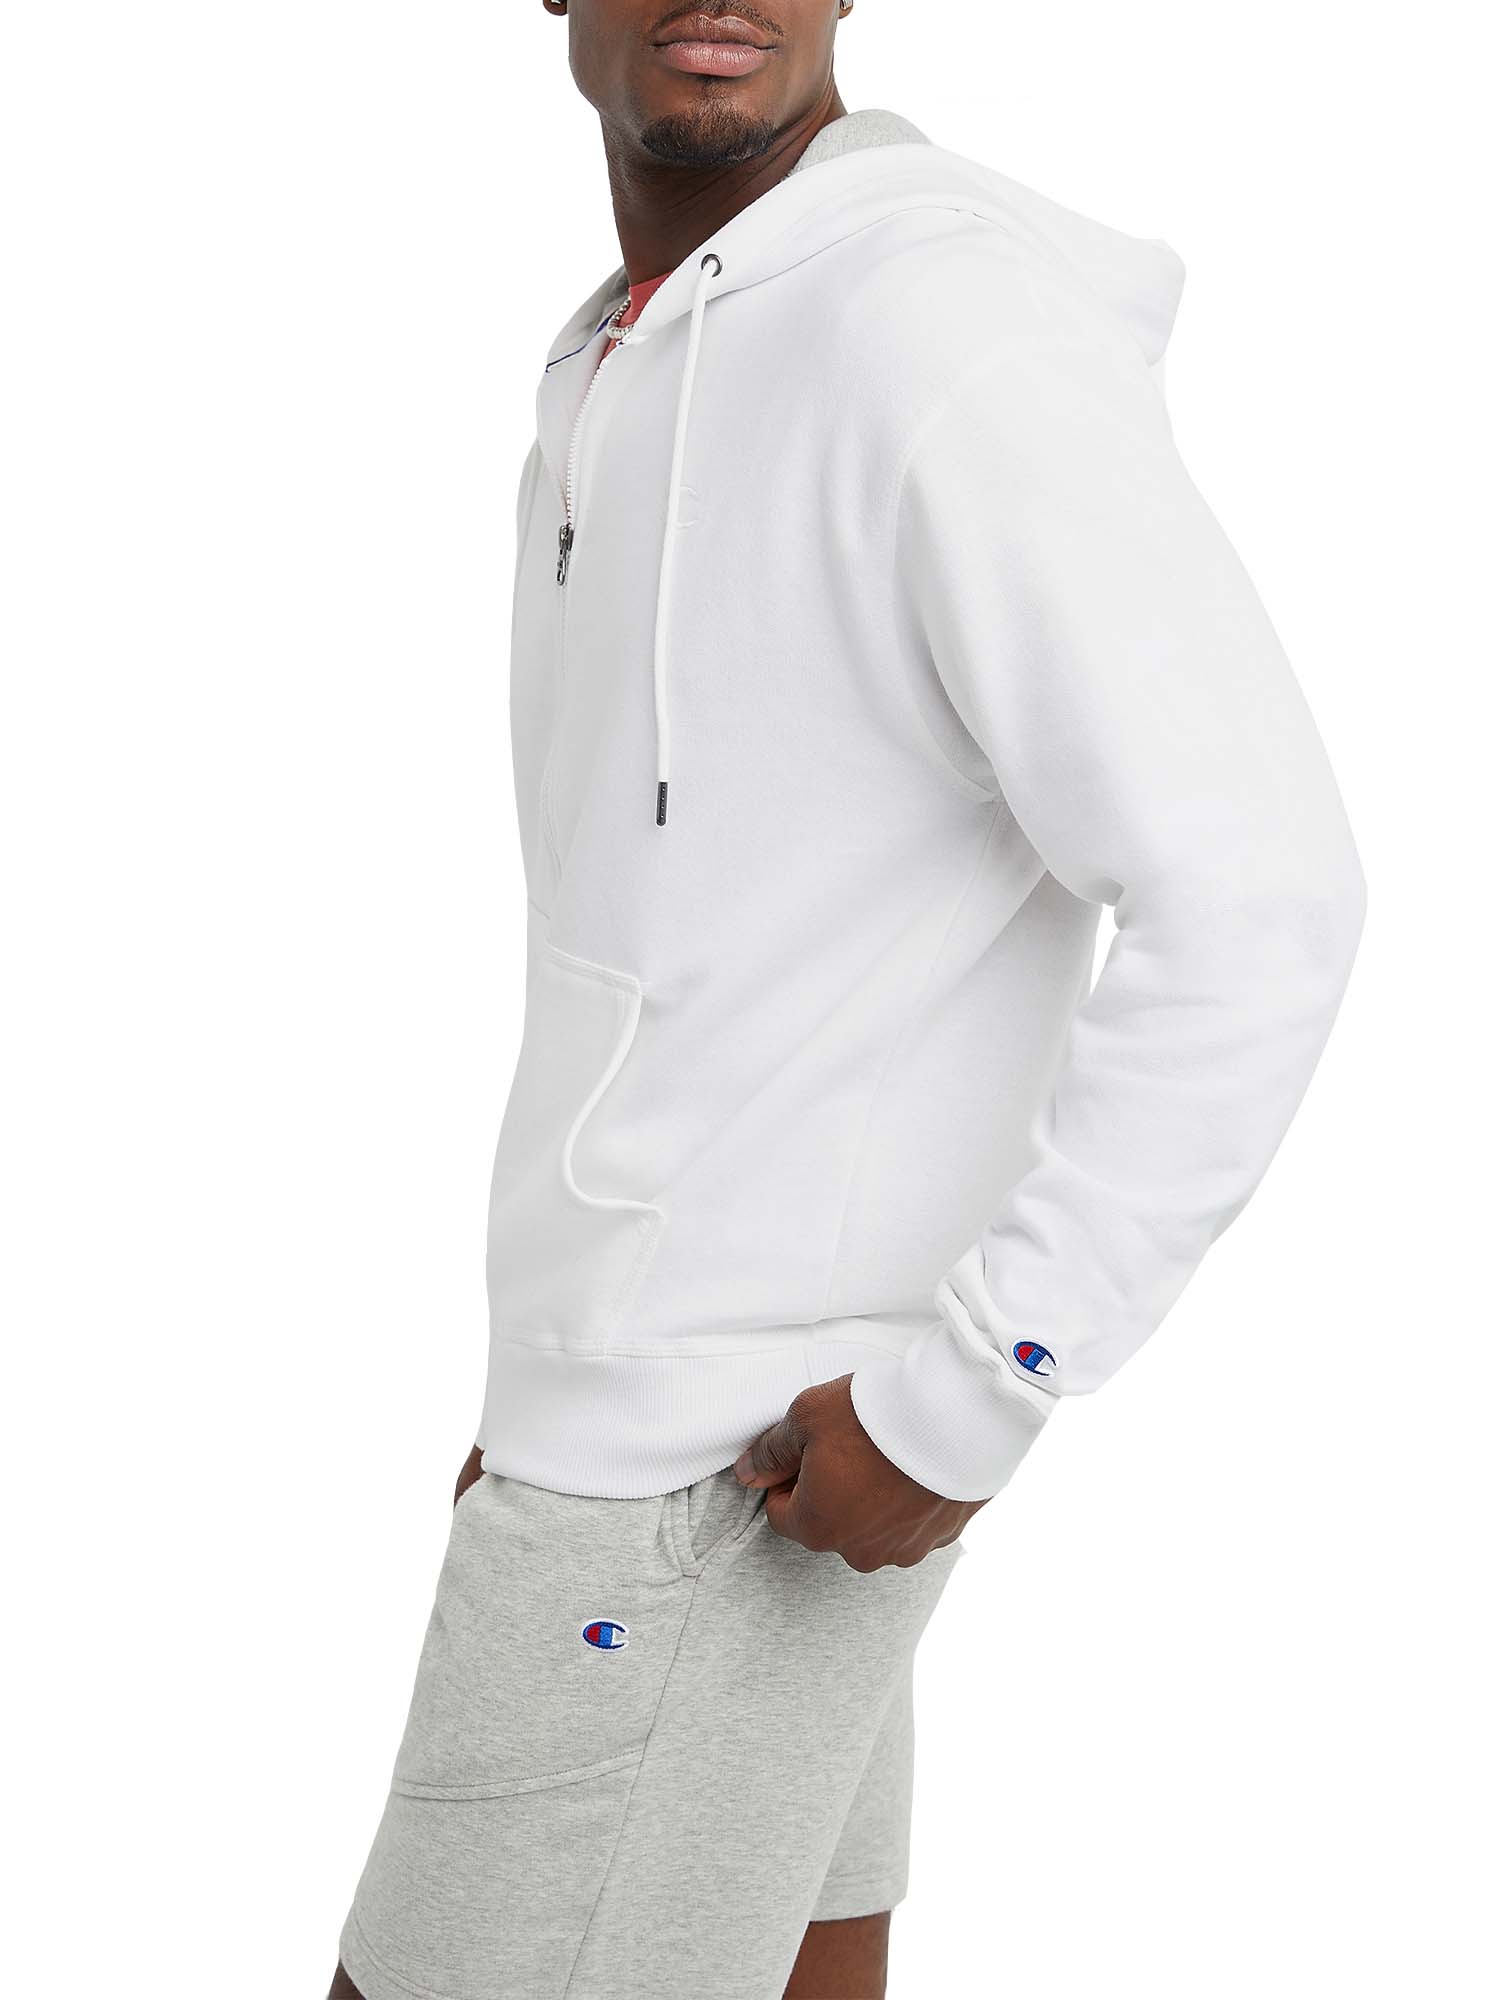 Champion Men's and Big Men's Powerblend Zip-Up Hoodie, Sizes up to 2XL - image 4 of 7